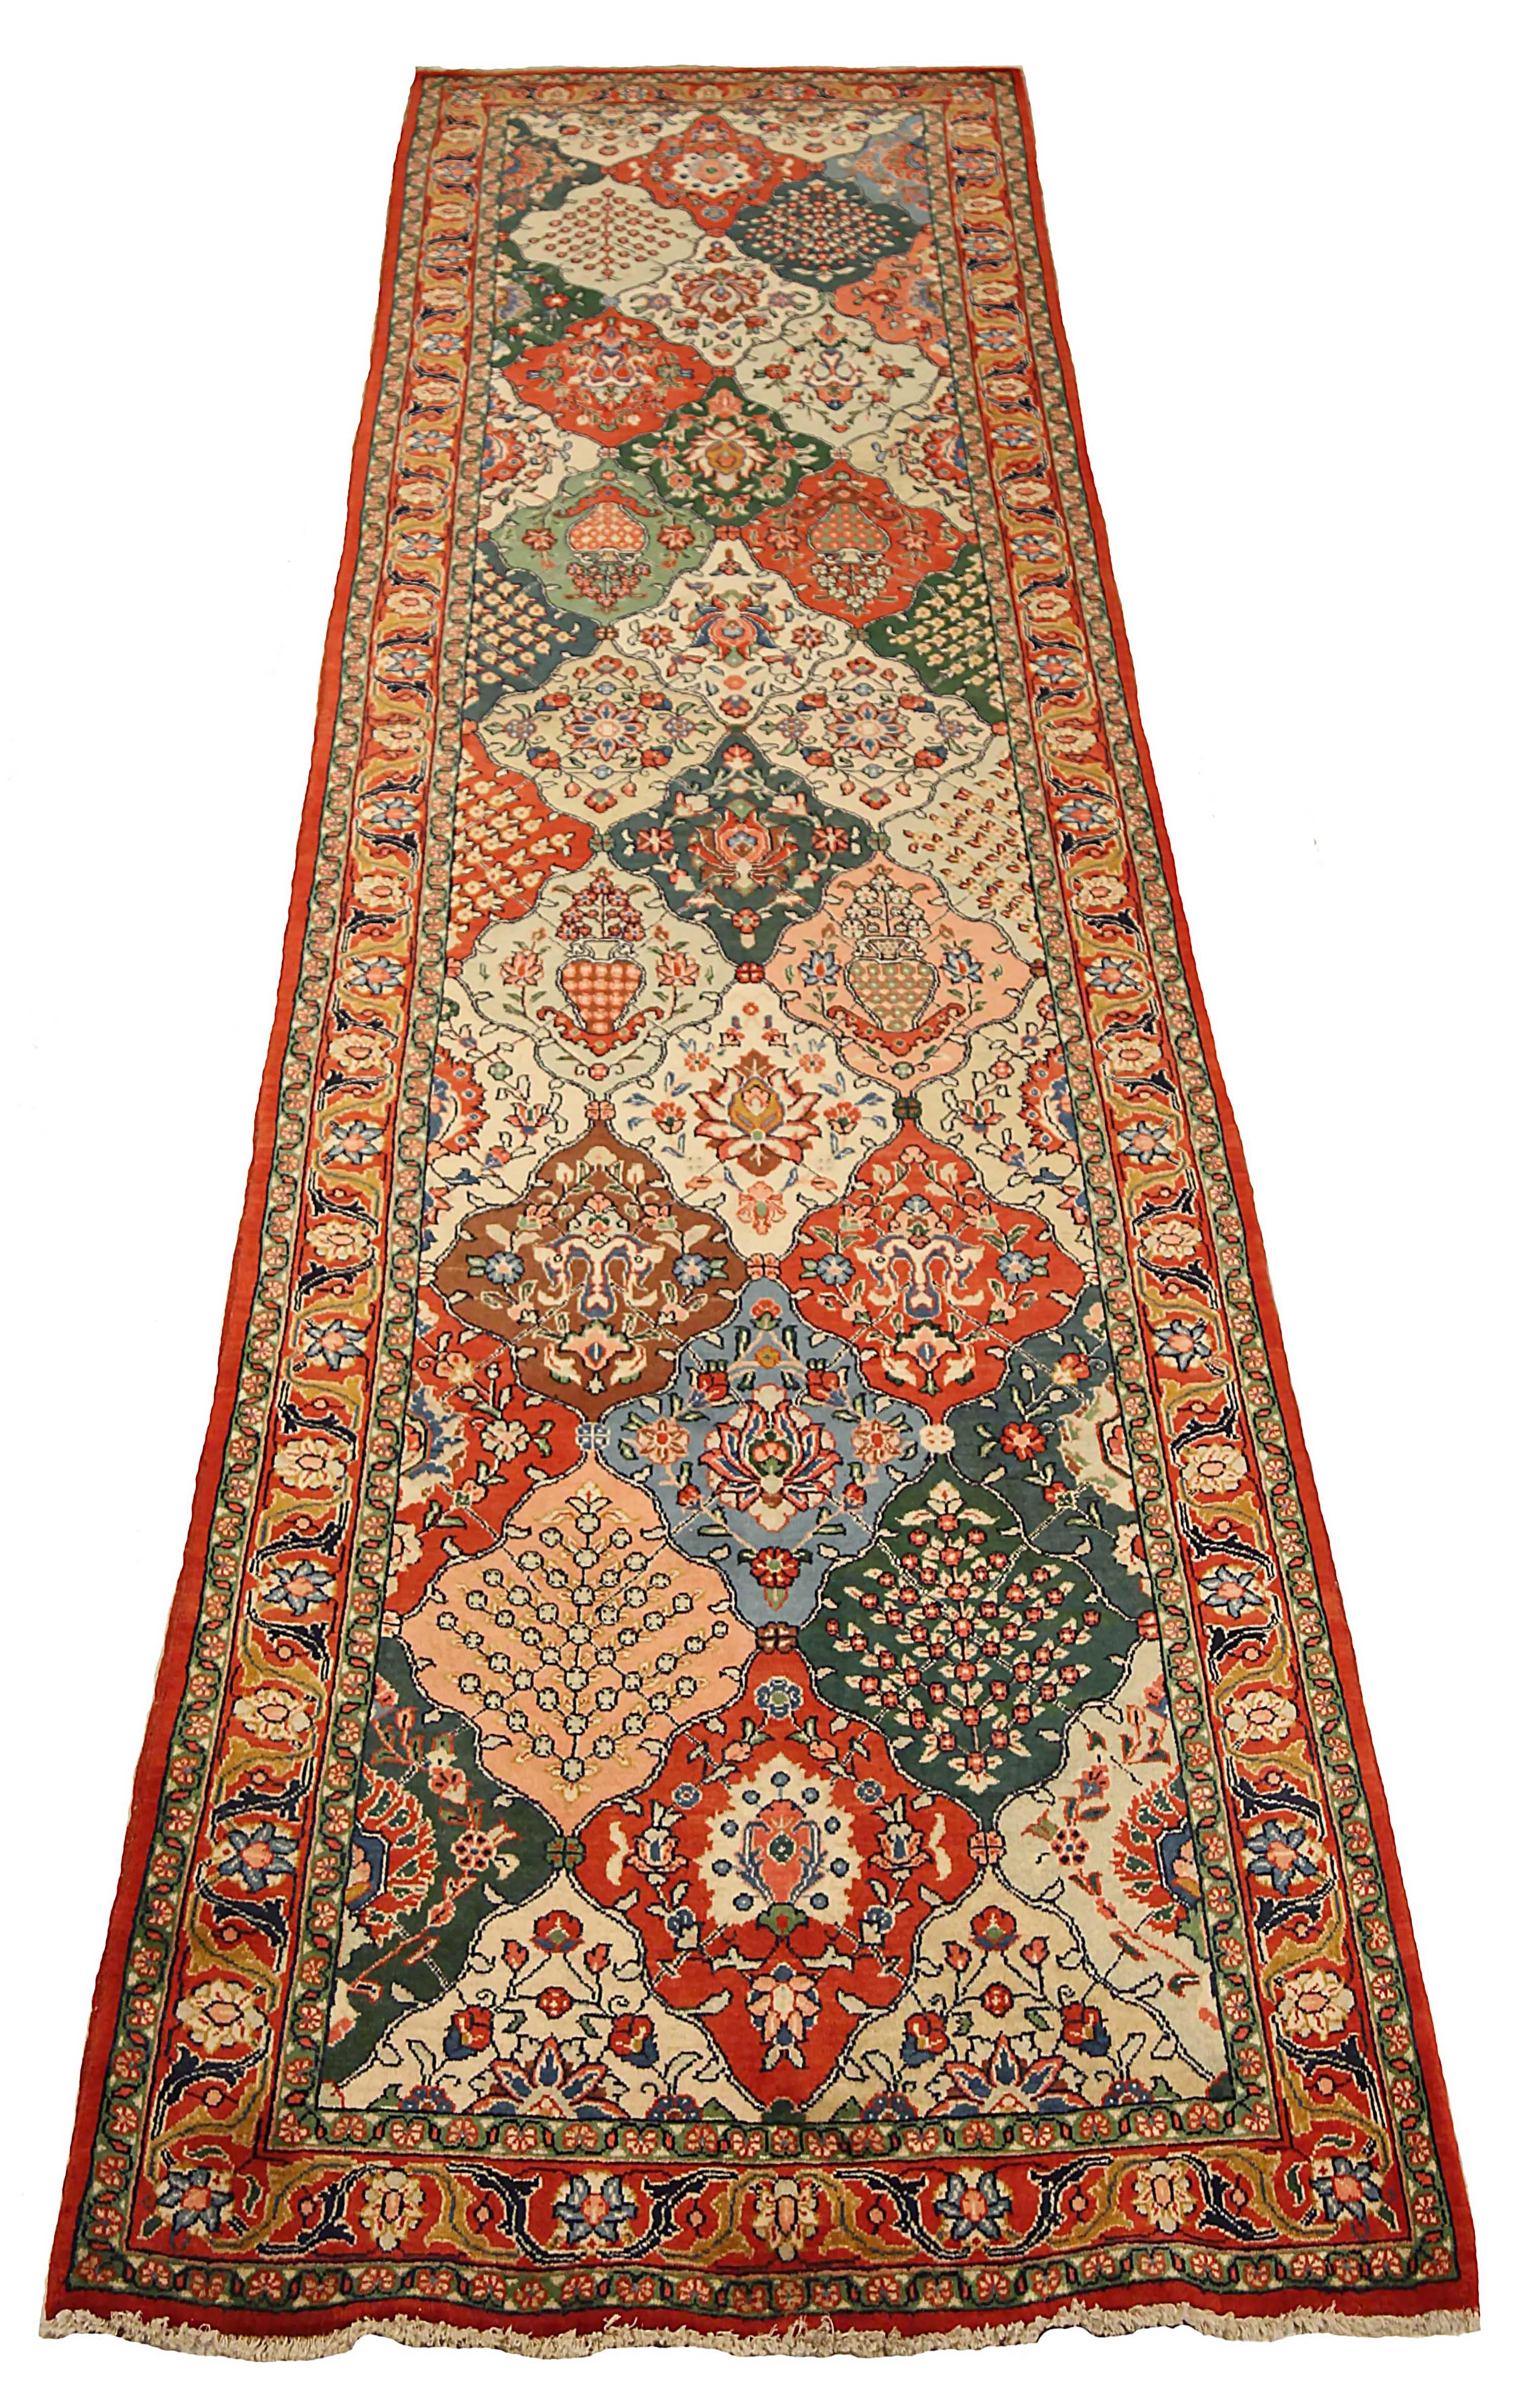 Antique Persian runner rug handwoven from the finest sheep’s wool. It’s colored with all-natural vegetable dyes that are safe for humans and pets. It’s a traditional Sarouk design handwoven by expert artisans. It’s a lovely runner rug that can be